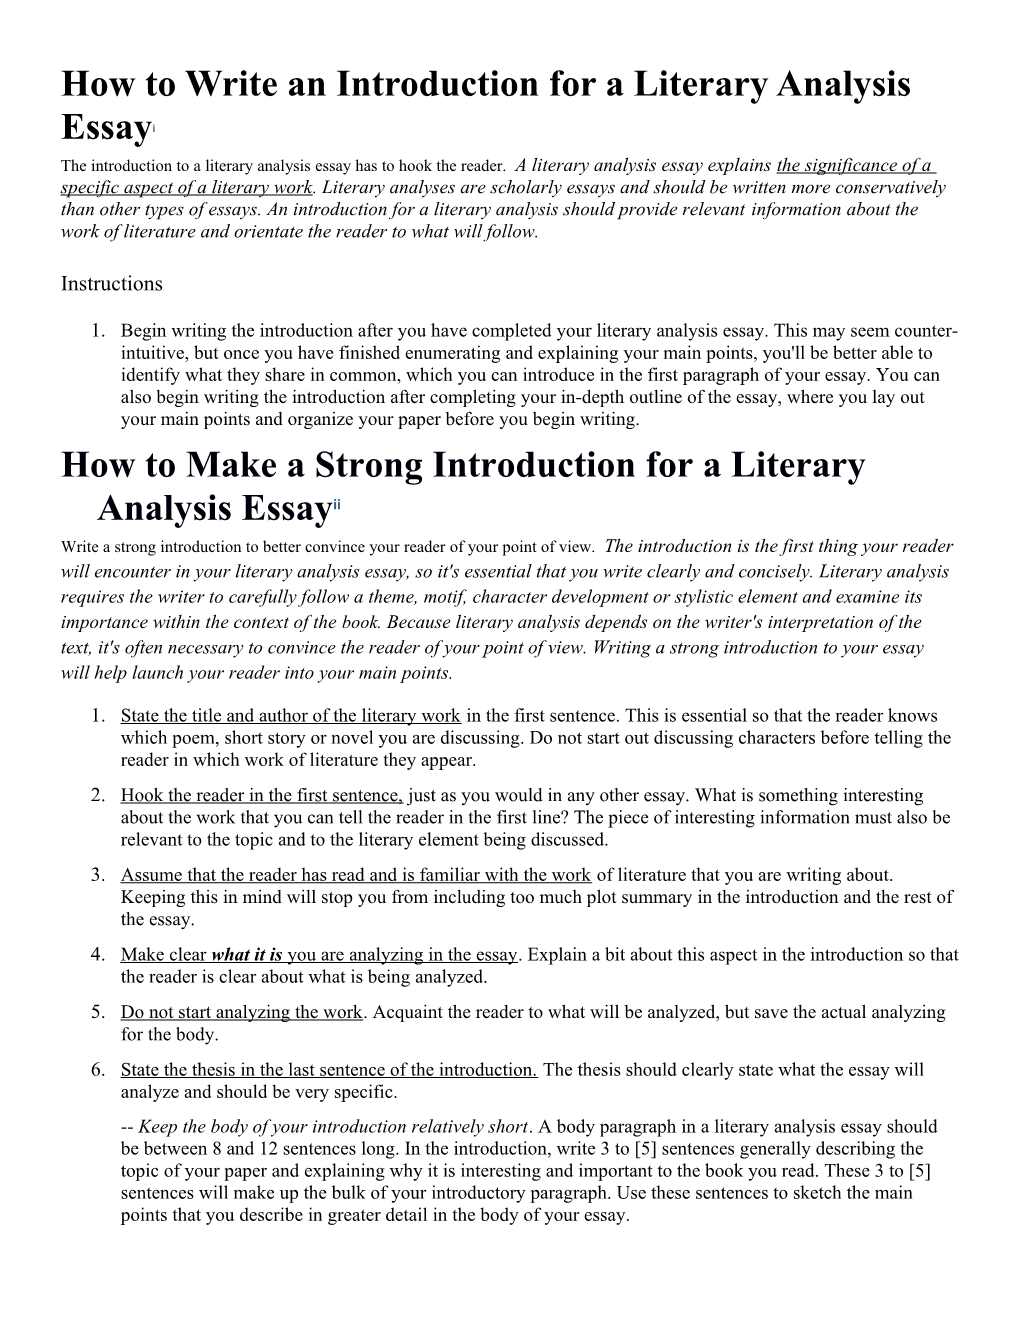 How to Write an Introduction for a Literary Analysis Essay I